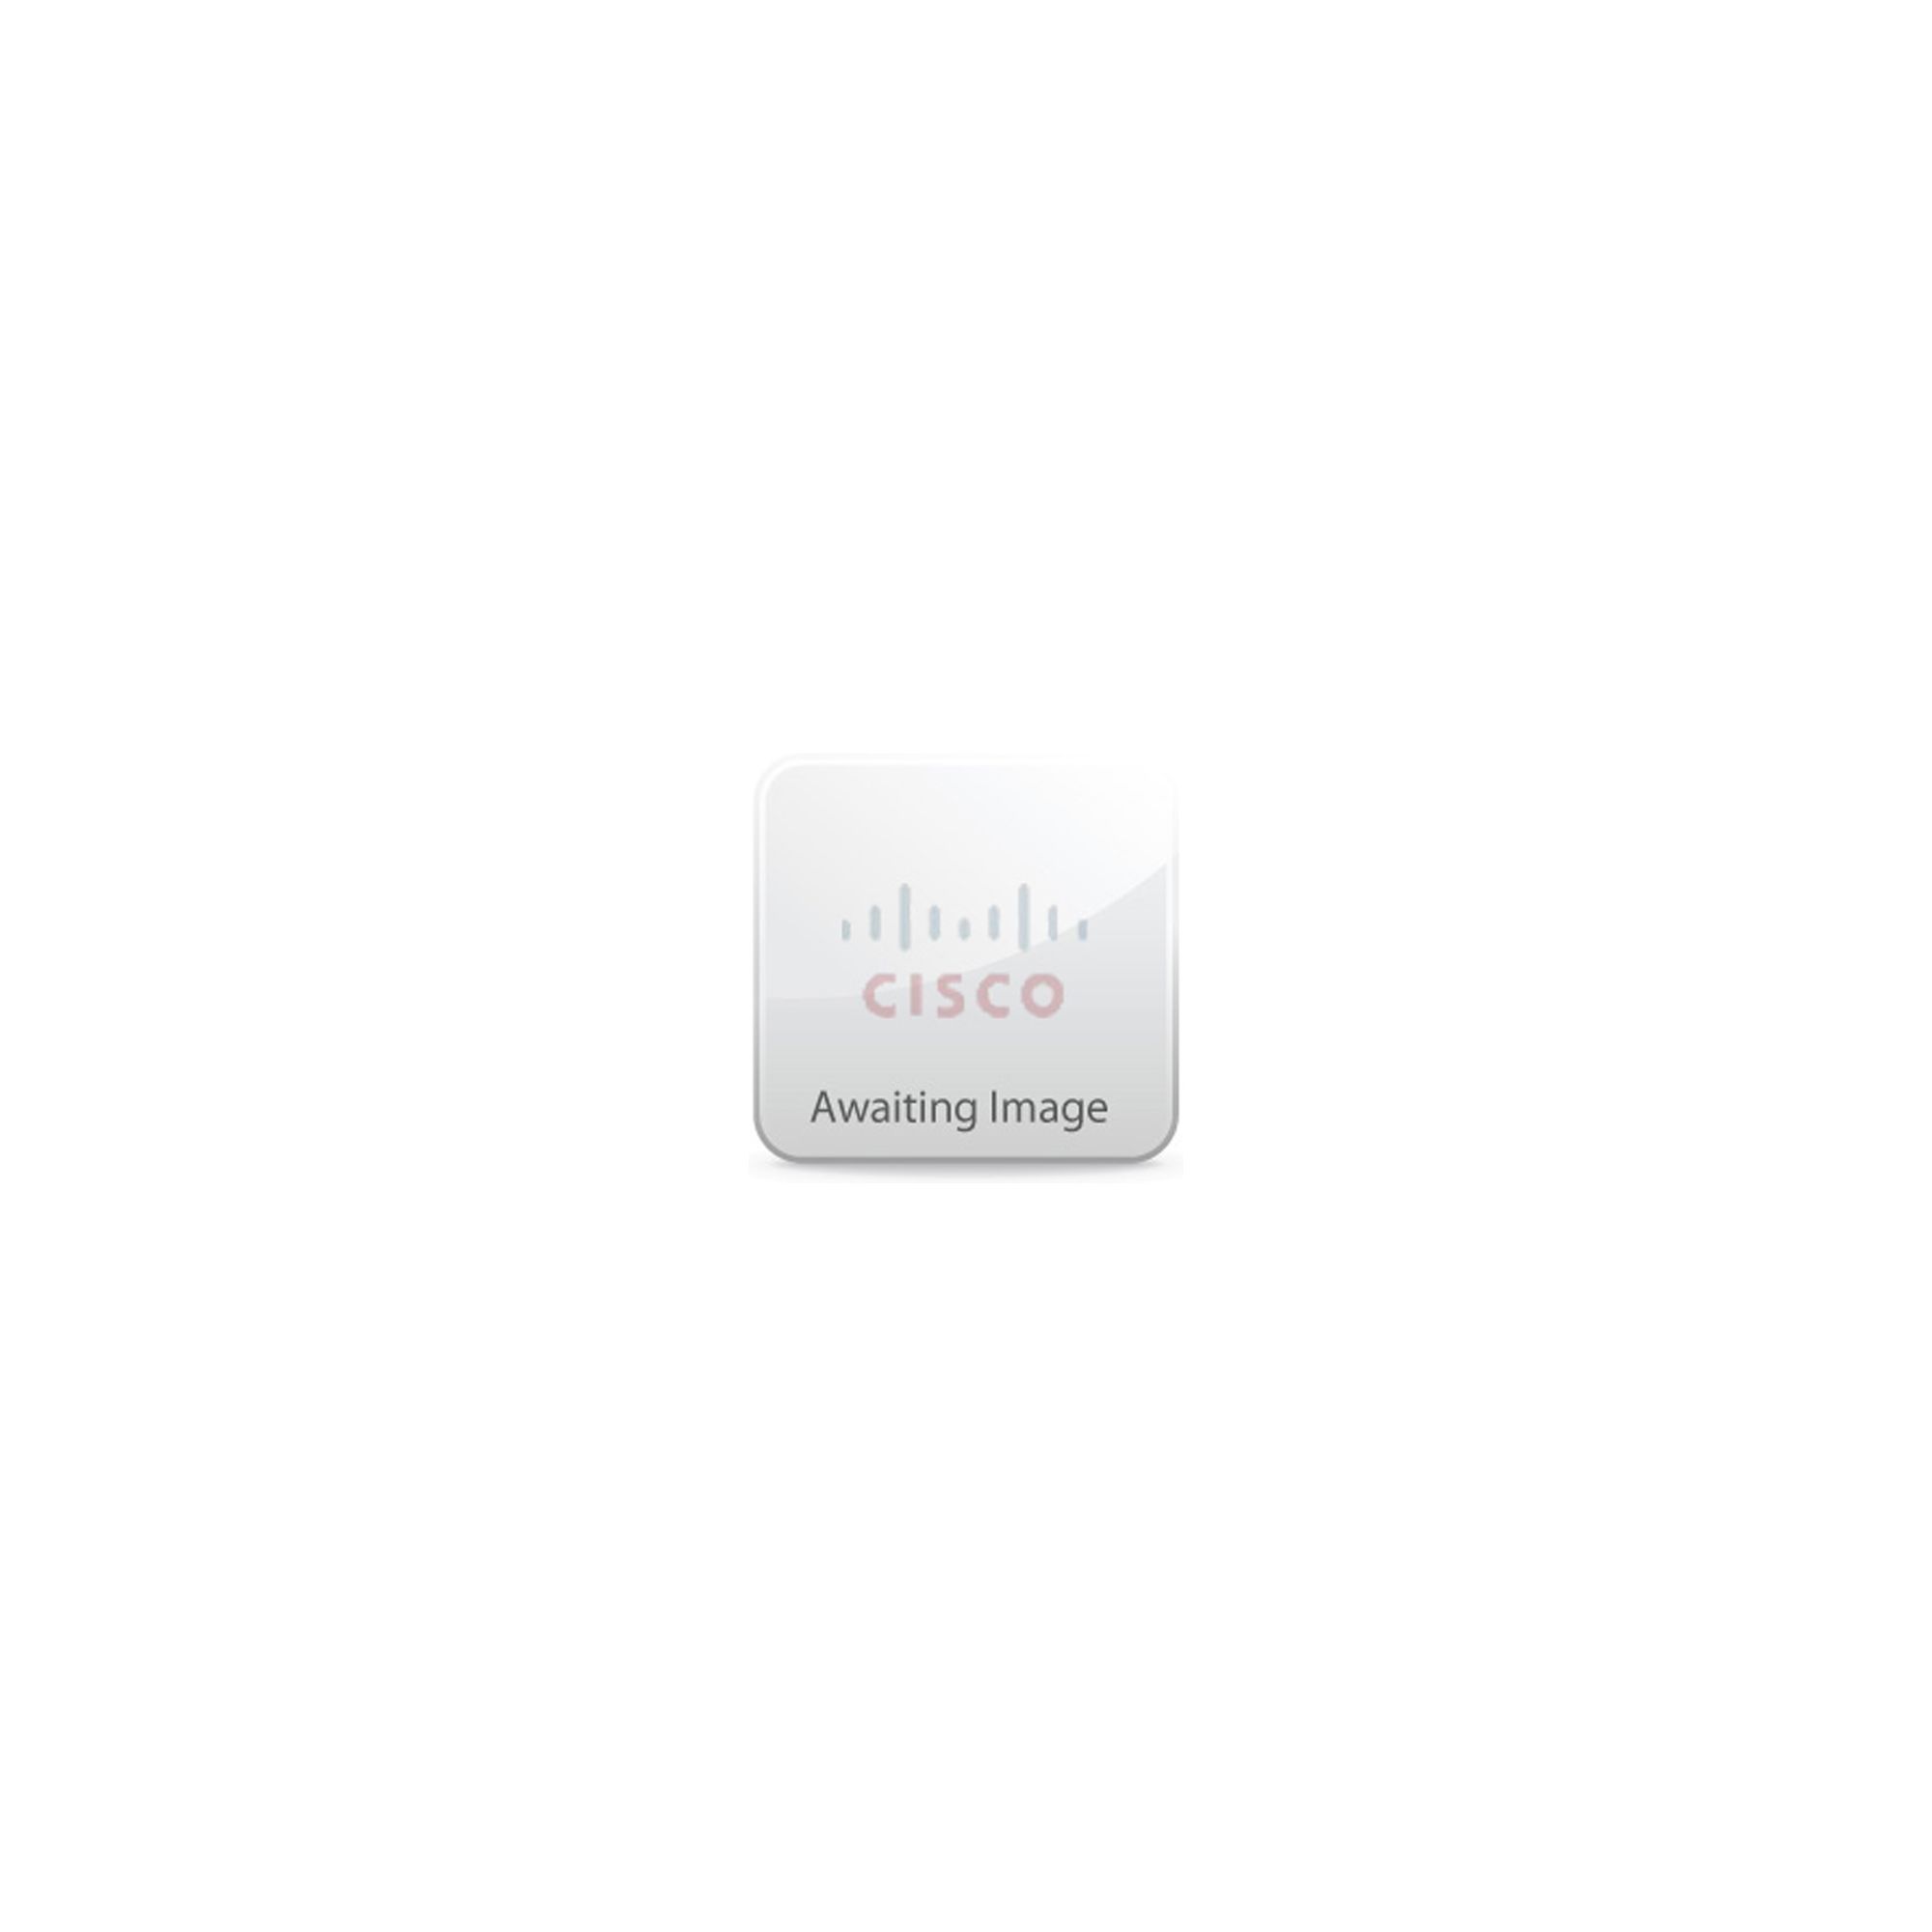 Cisco 1GB DRAM (1DIMM) for Cisco 2901 2911 2921 ISRSPARE at Tescos Direct